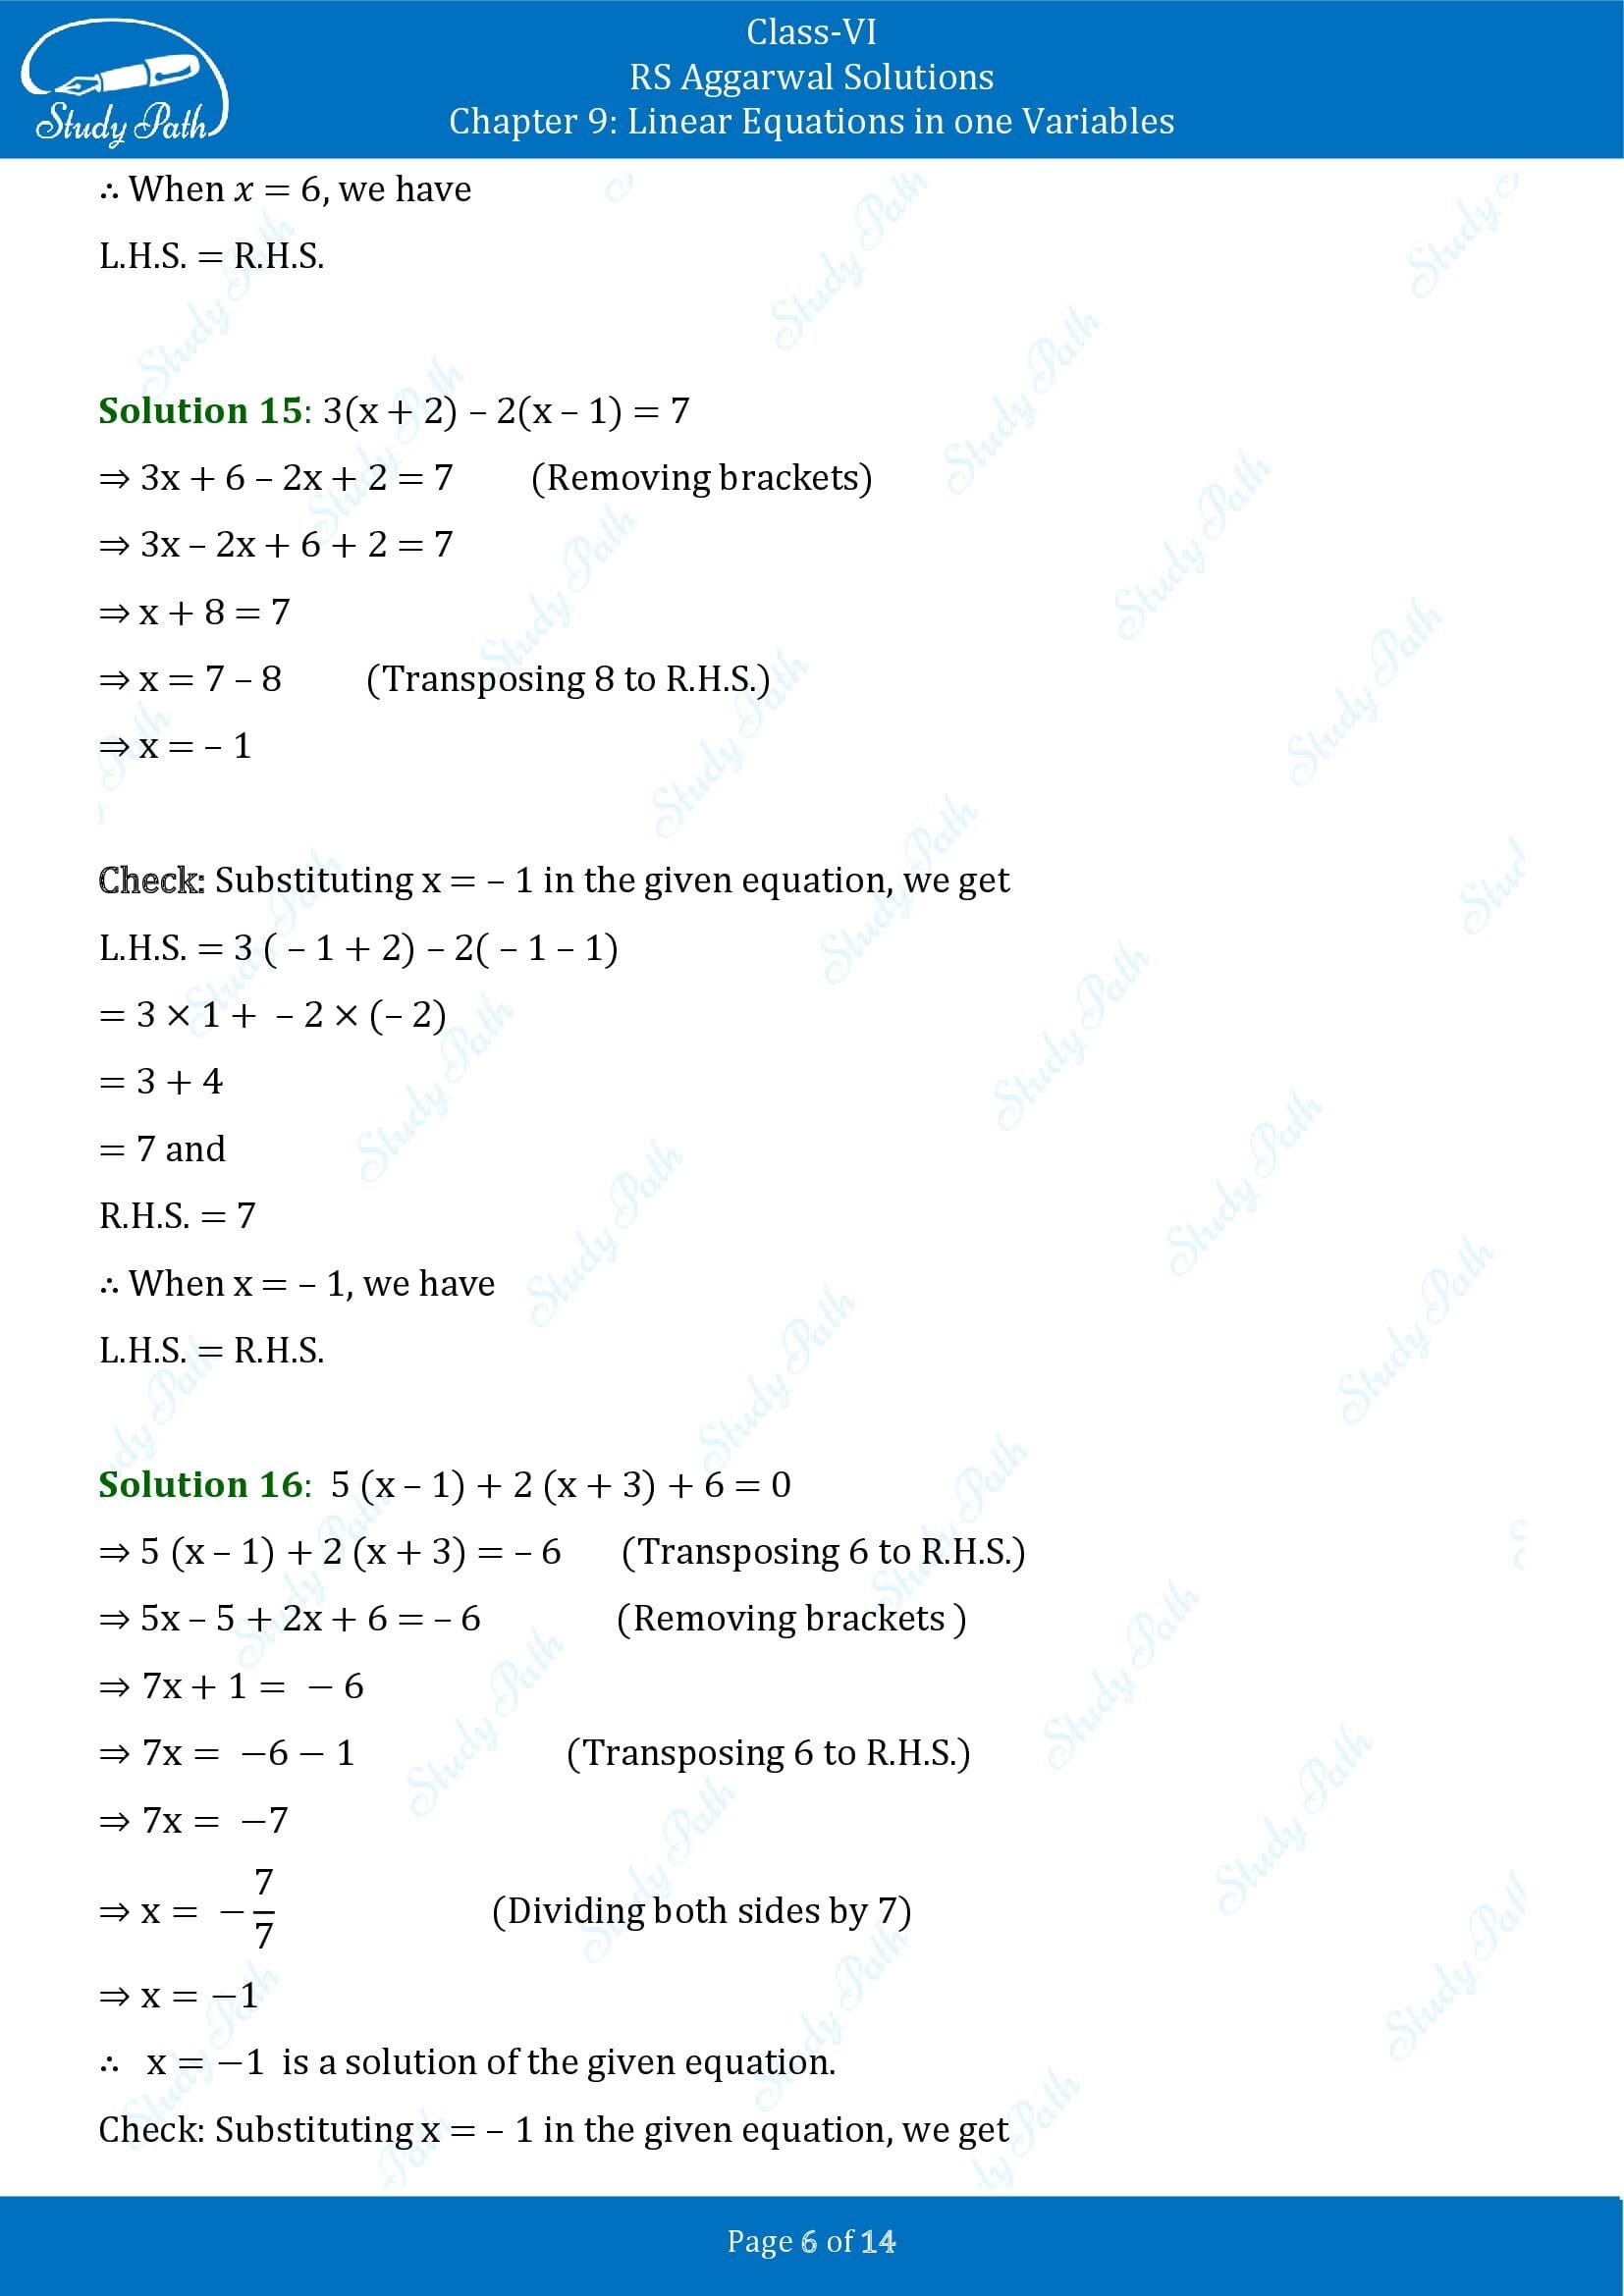 RS Aggarwal Solutions Class 6 Chapter 9 Linear Equations in One Variable Exercise 9B 00006